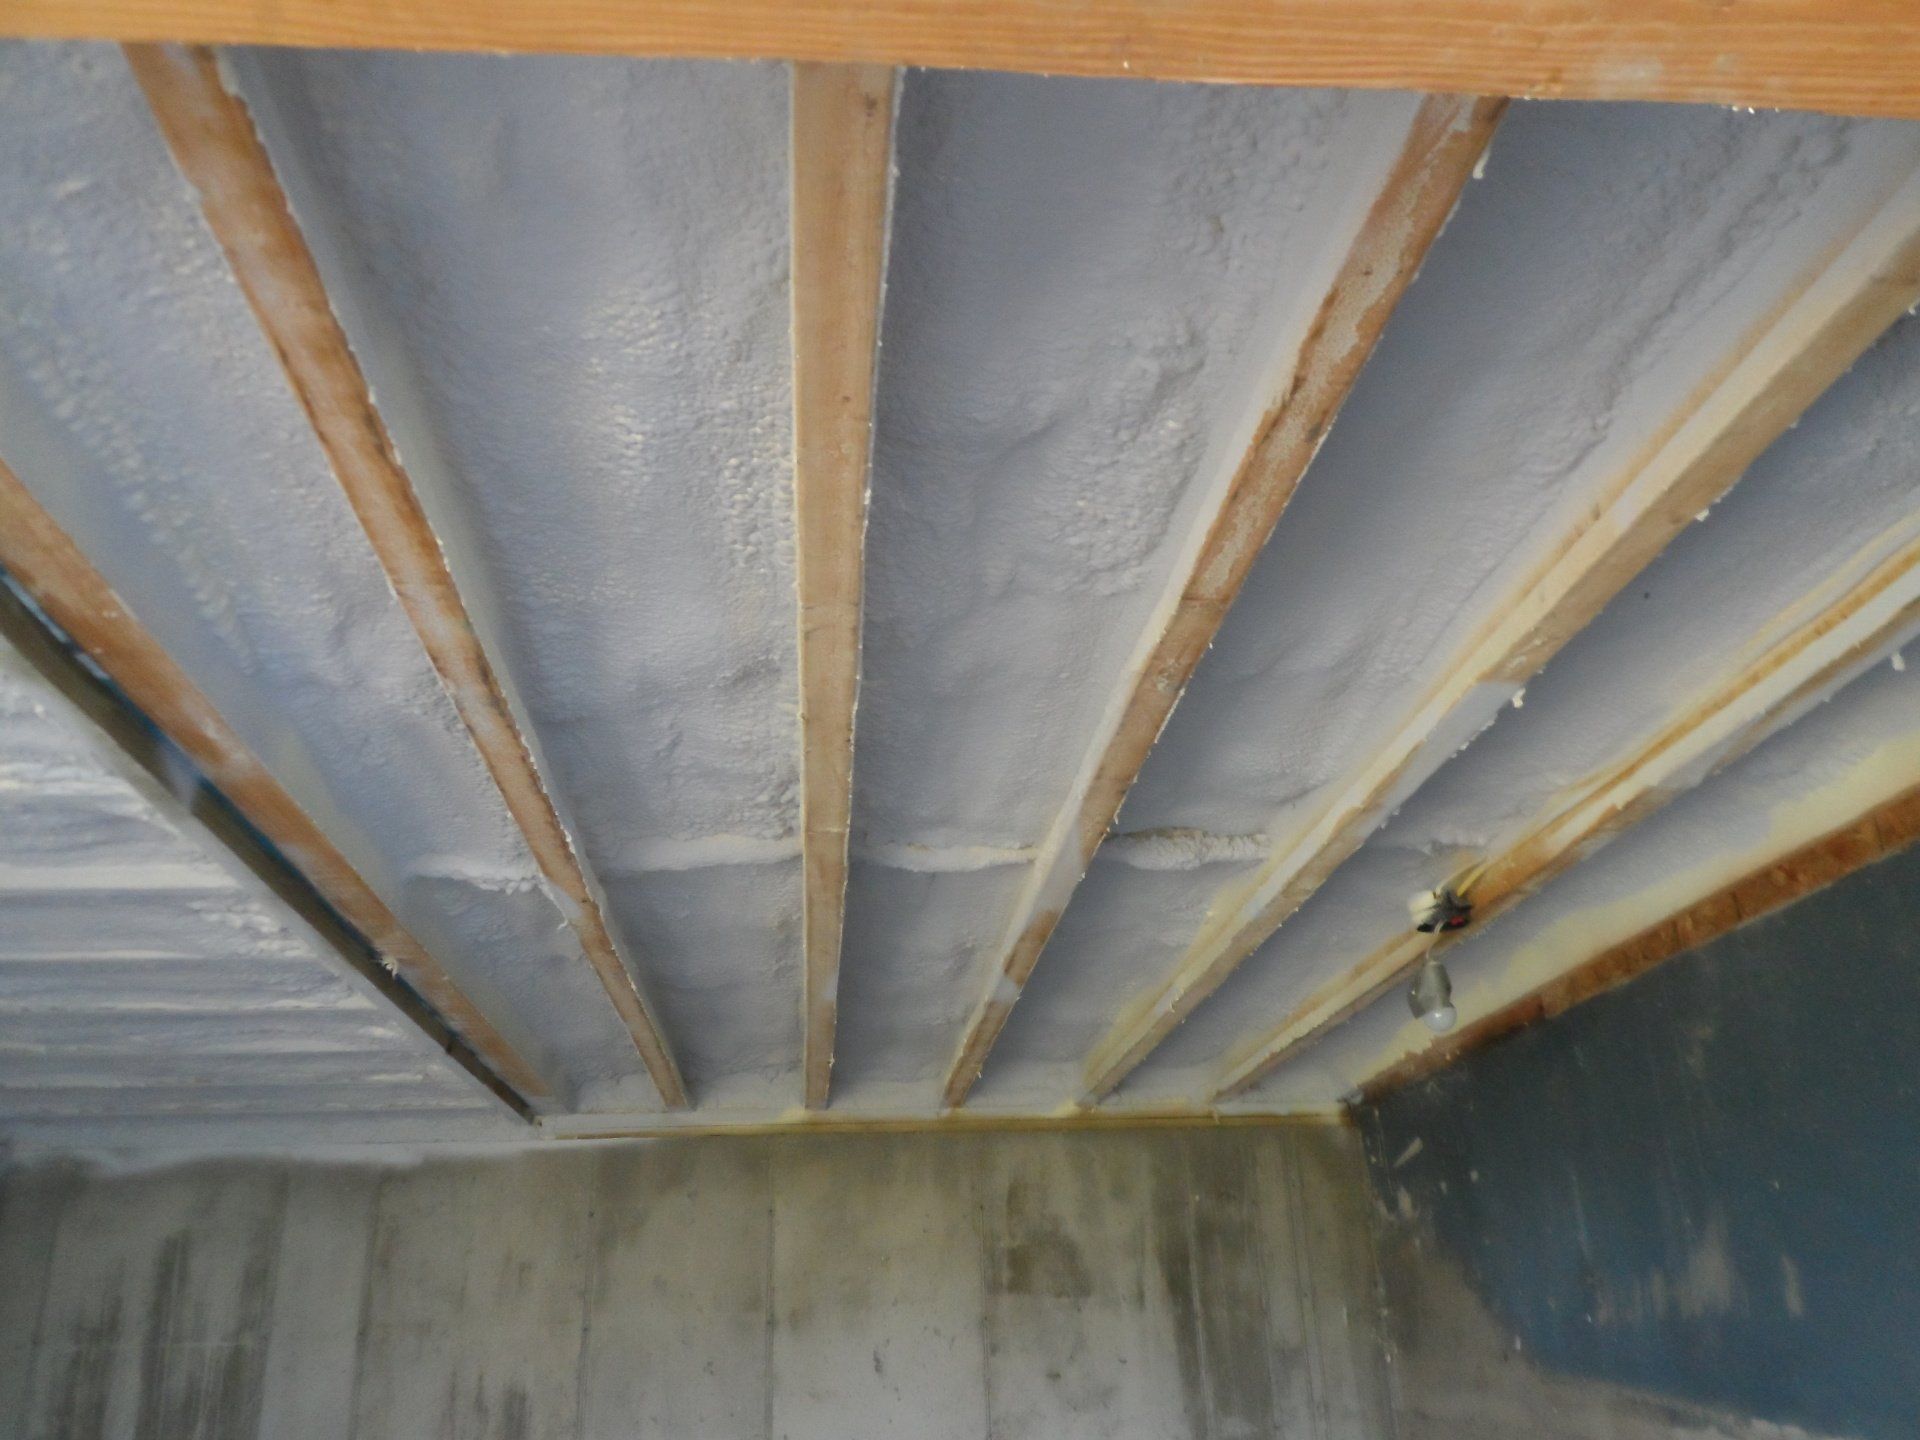 Ceiling insulation installed in a Northern  Vermont home.